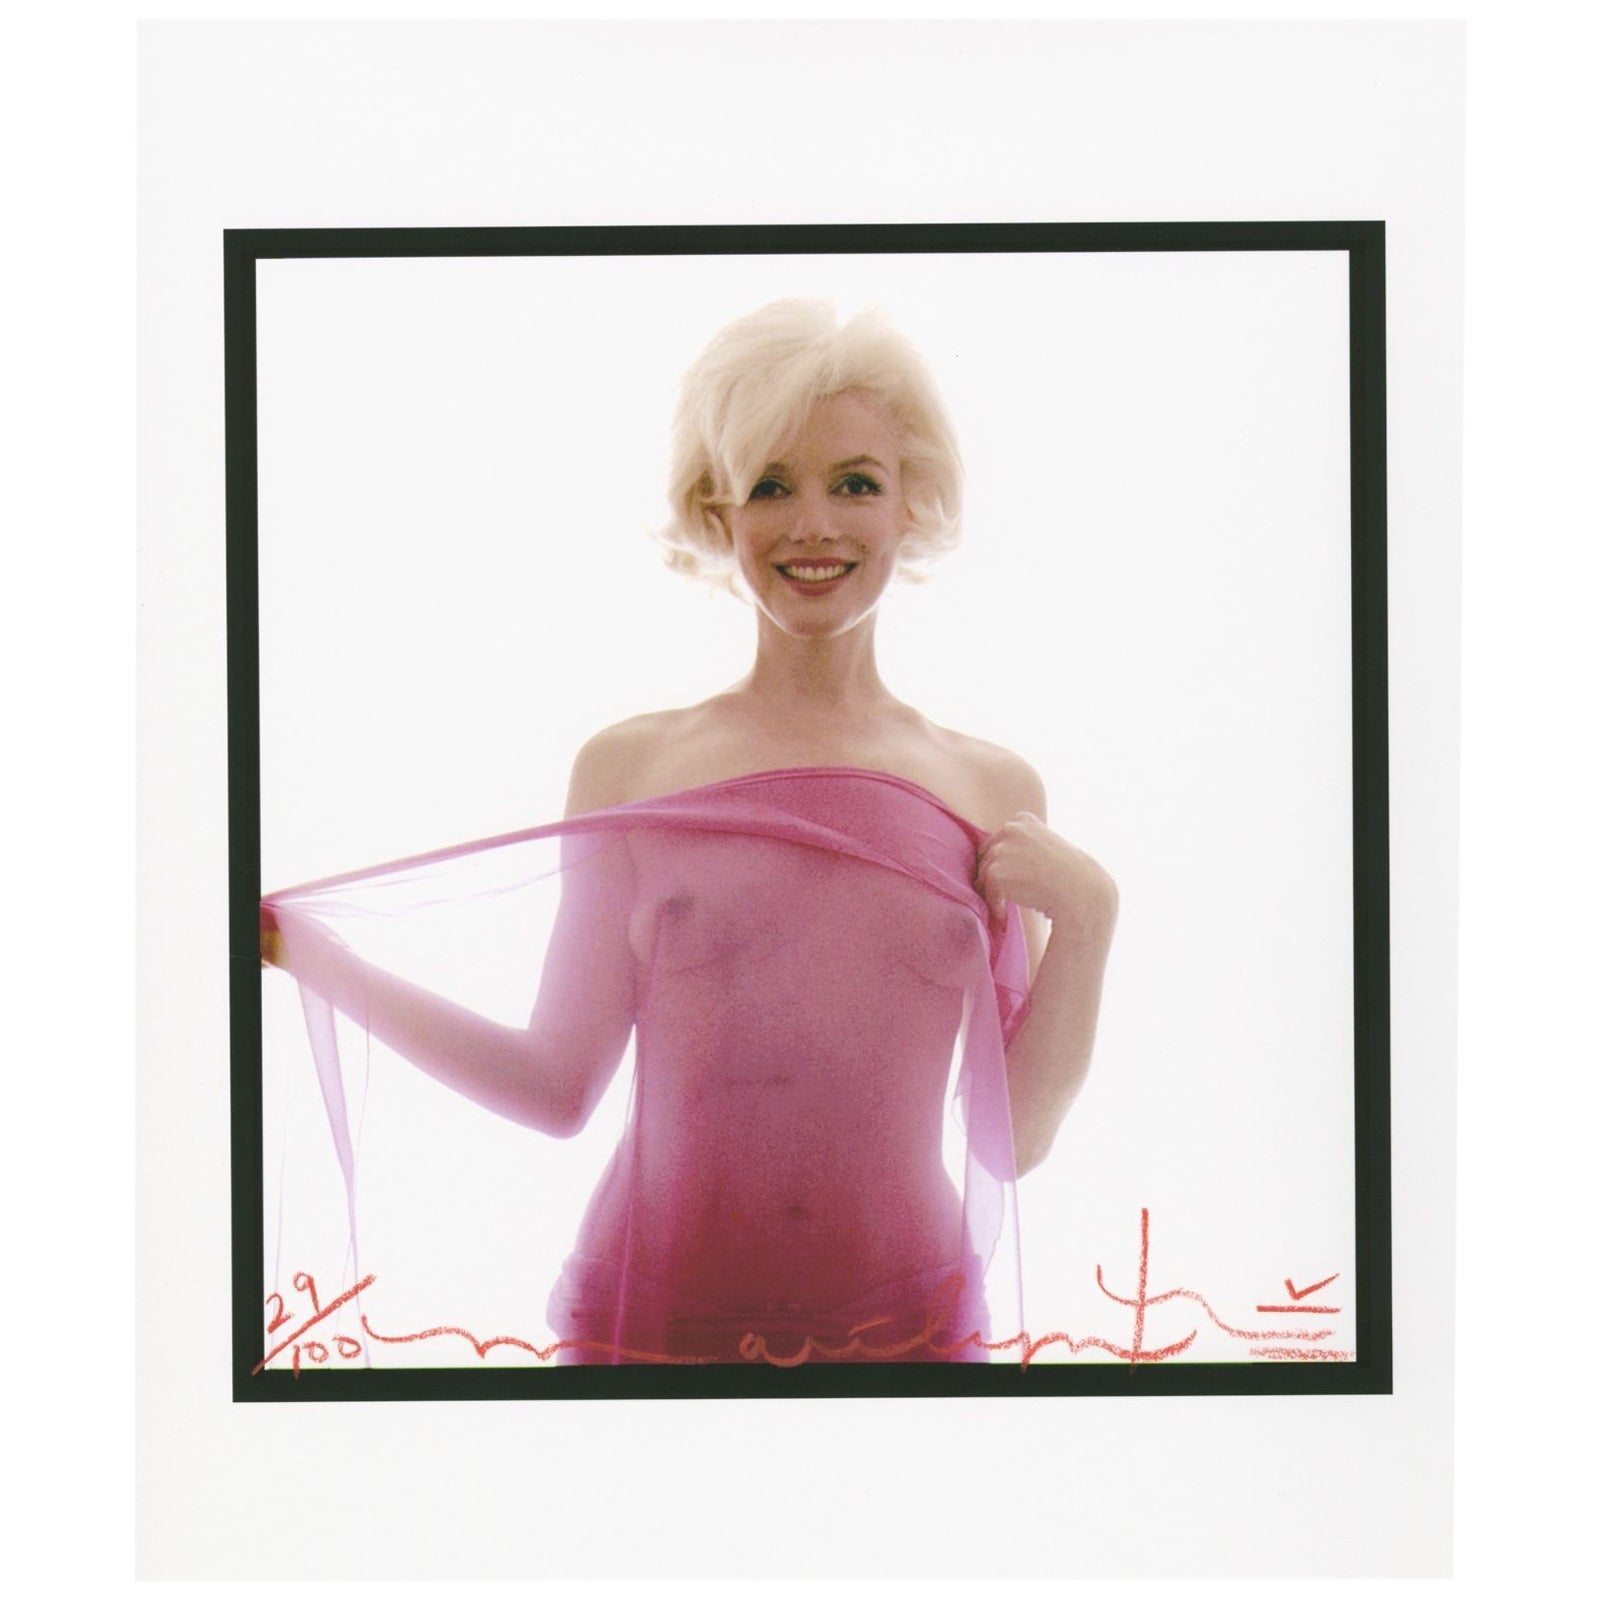 Marilyn Monroe in Fuschia Scarf' (from the Last Sitting), published in 1962